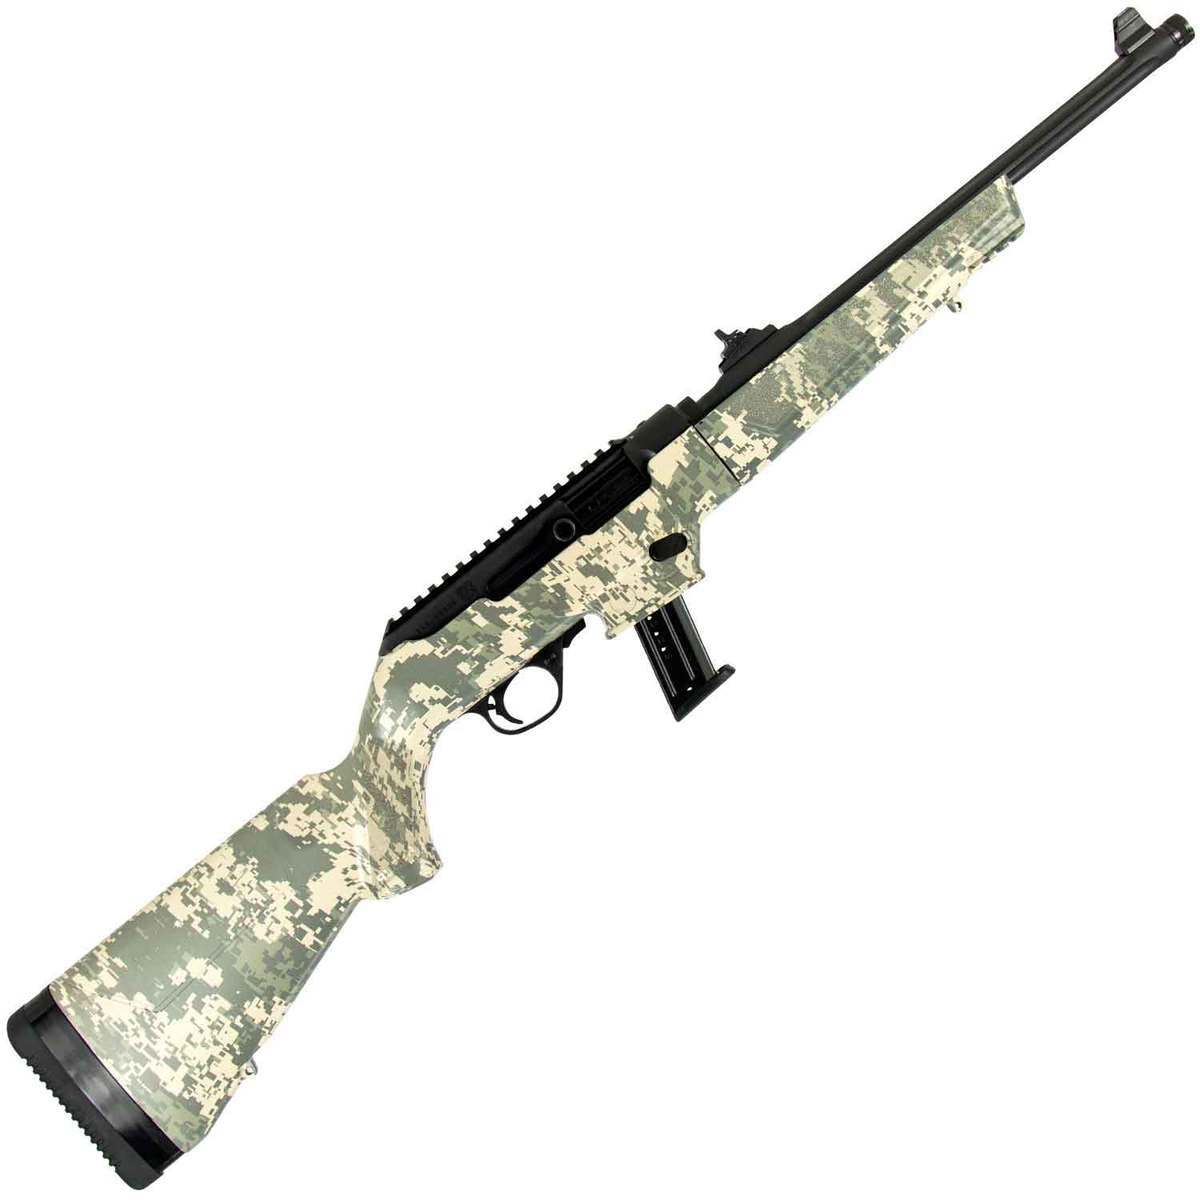 ruger-pc-carbine-9mm-luger-1612in-digital-camoblack-semi-automatic-modern-sporting-rifle-171-r...jpg